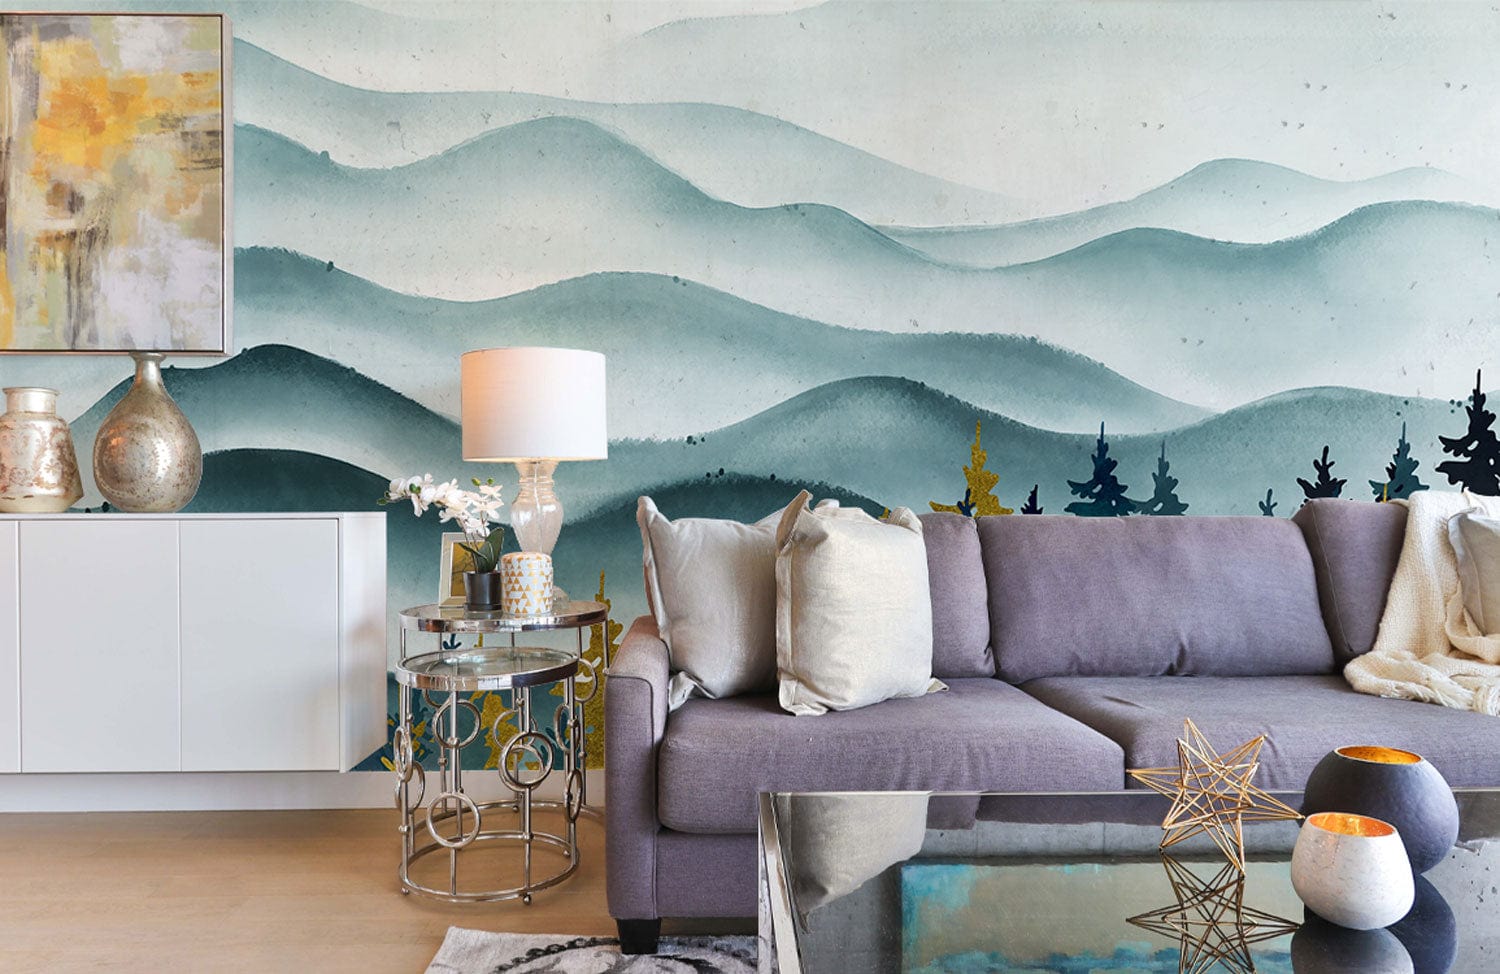 How About an Ombre-Inspired Mural Wallpaper Design? Ink Mountain Waves, an Excellent Option for Decorating the Living Room